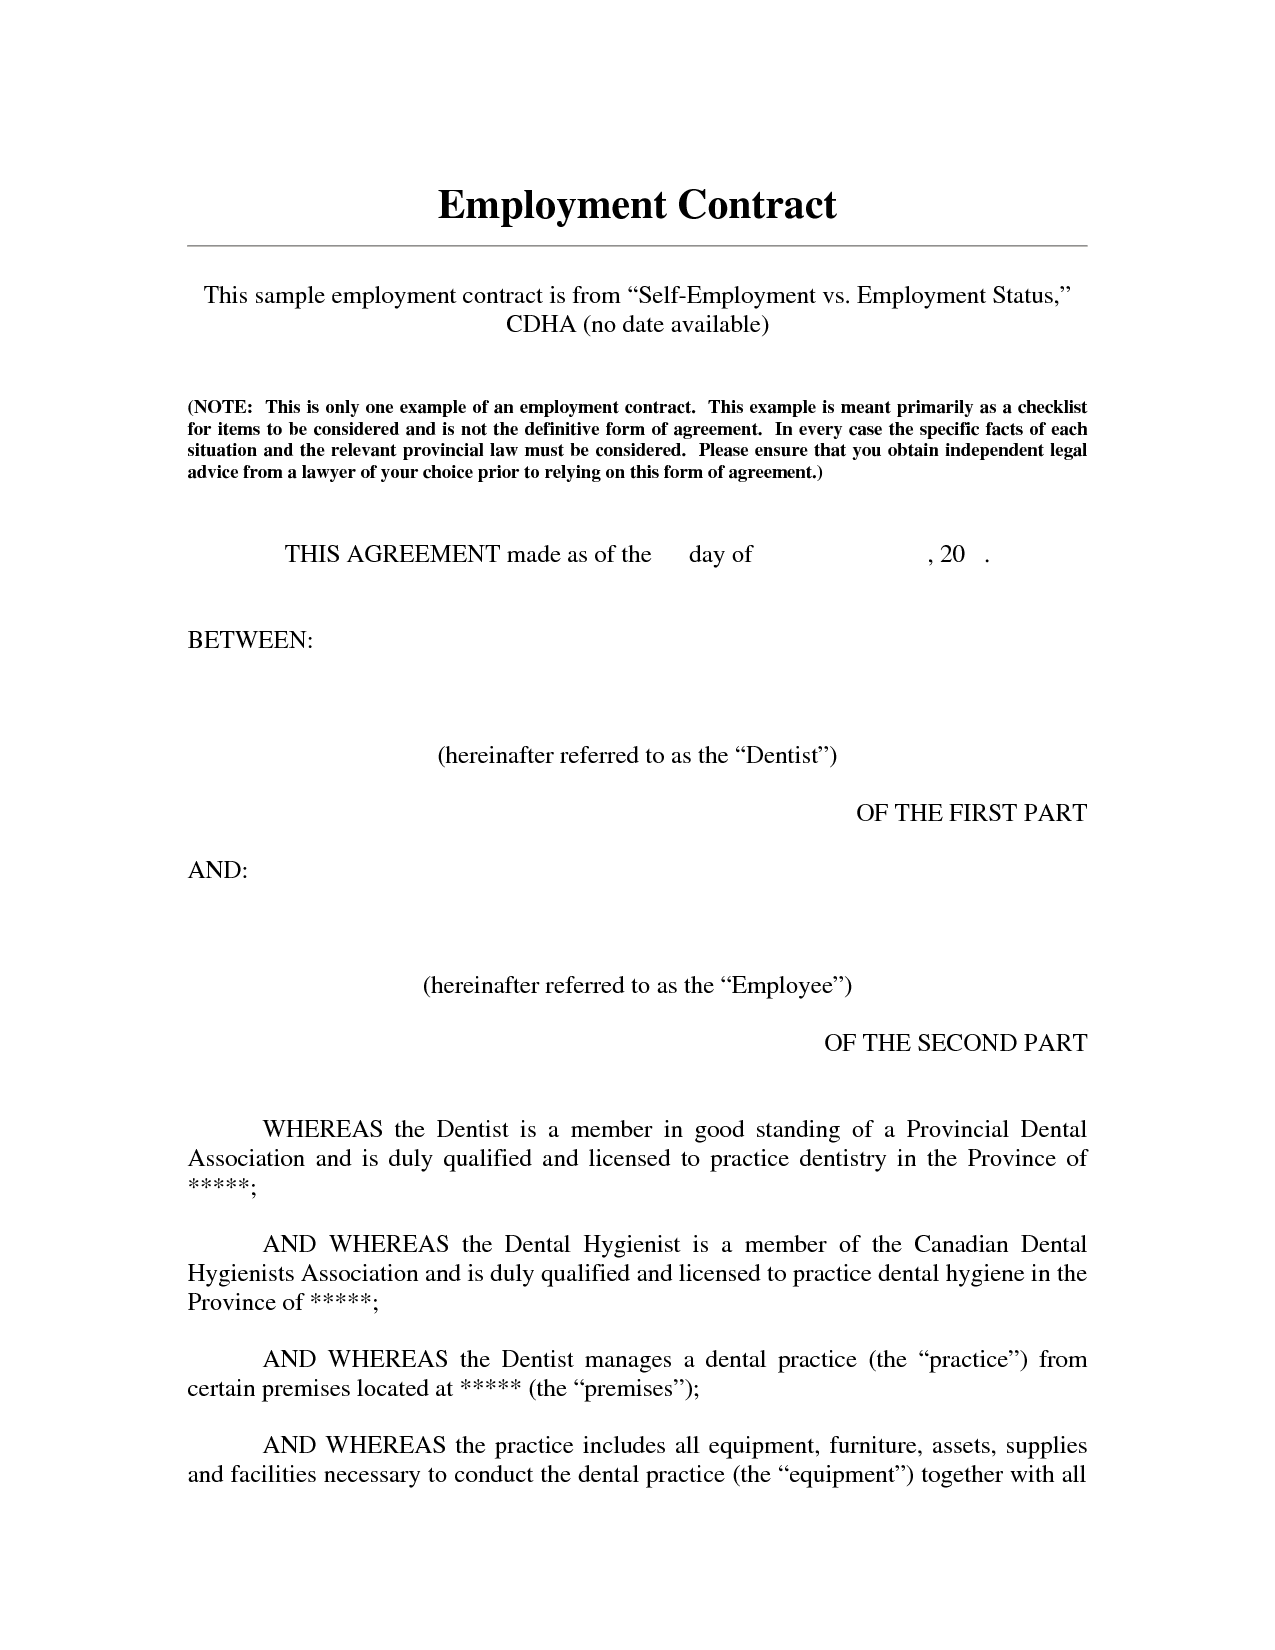 employment-agreement-contract-template-free-printable-documents-50